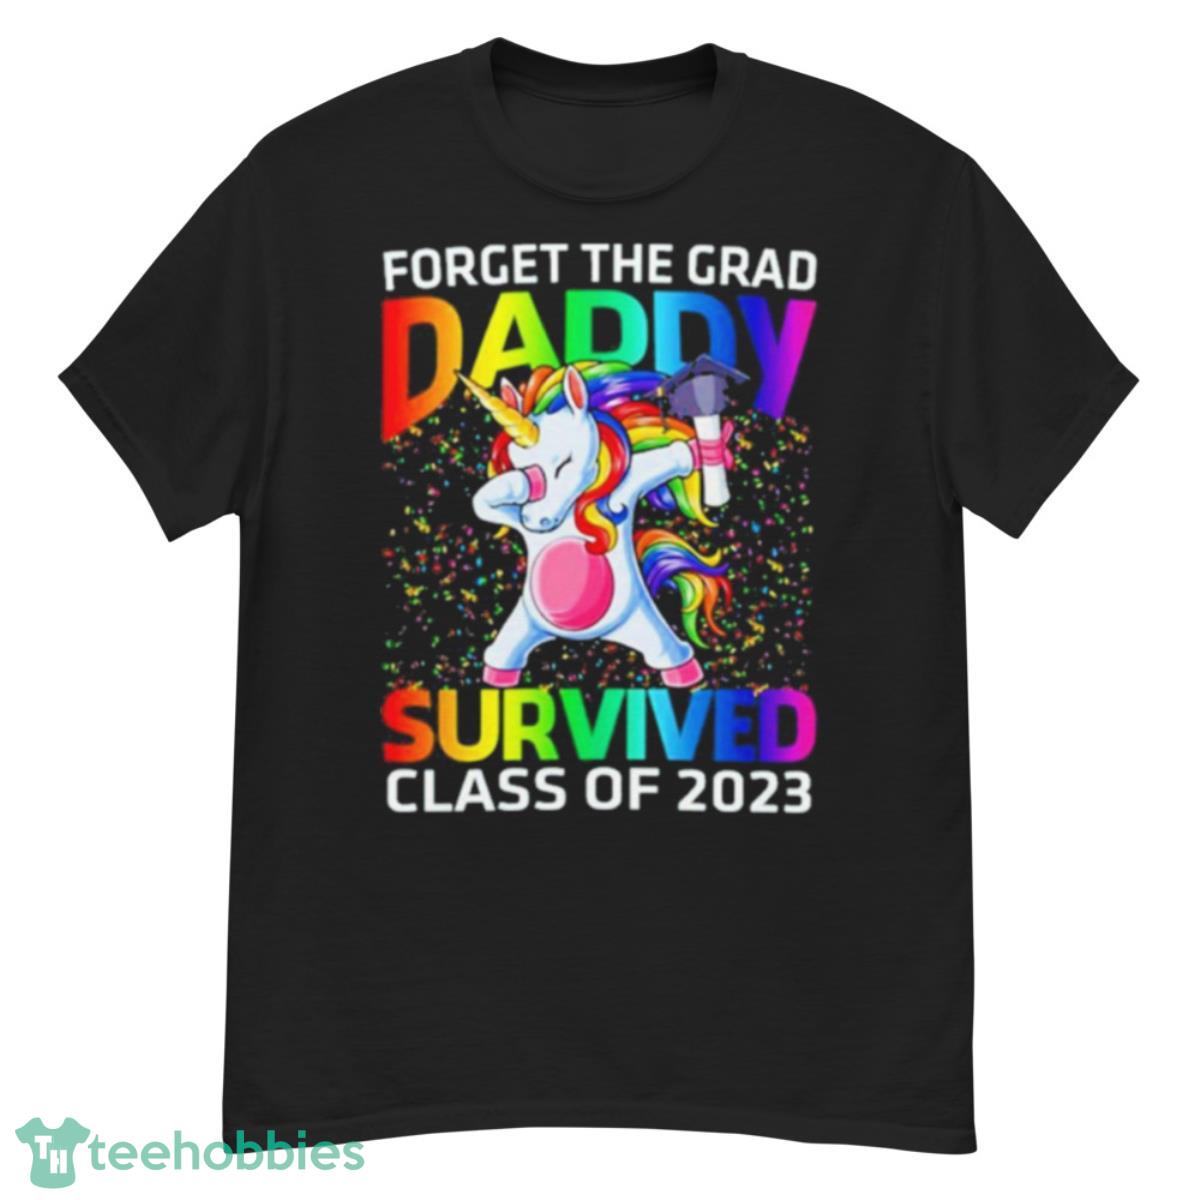 Forget The Graduate Daddy Survived Class Of 2023 Graduation Unicorn Shirt - G500 Men’s Classic T-Shirt